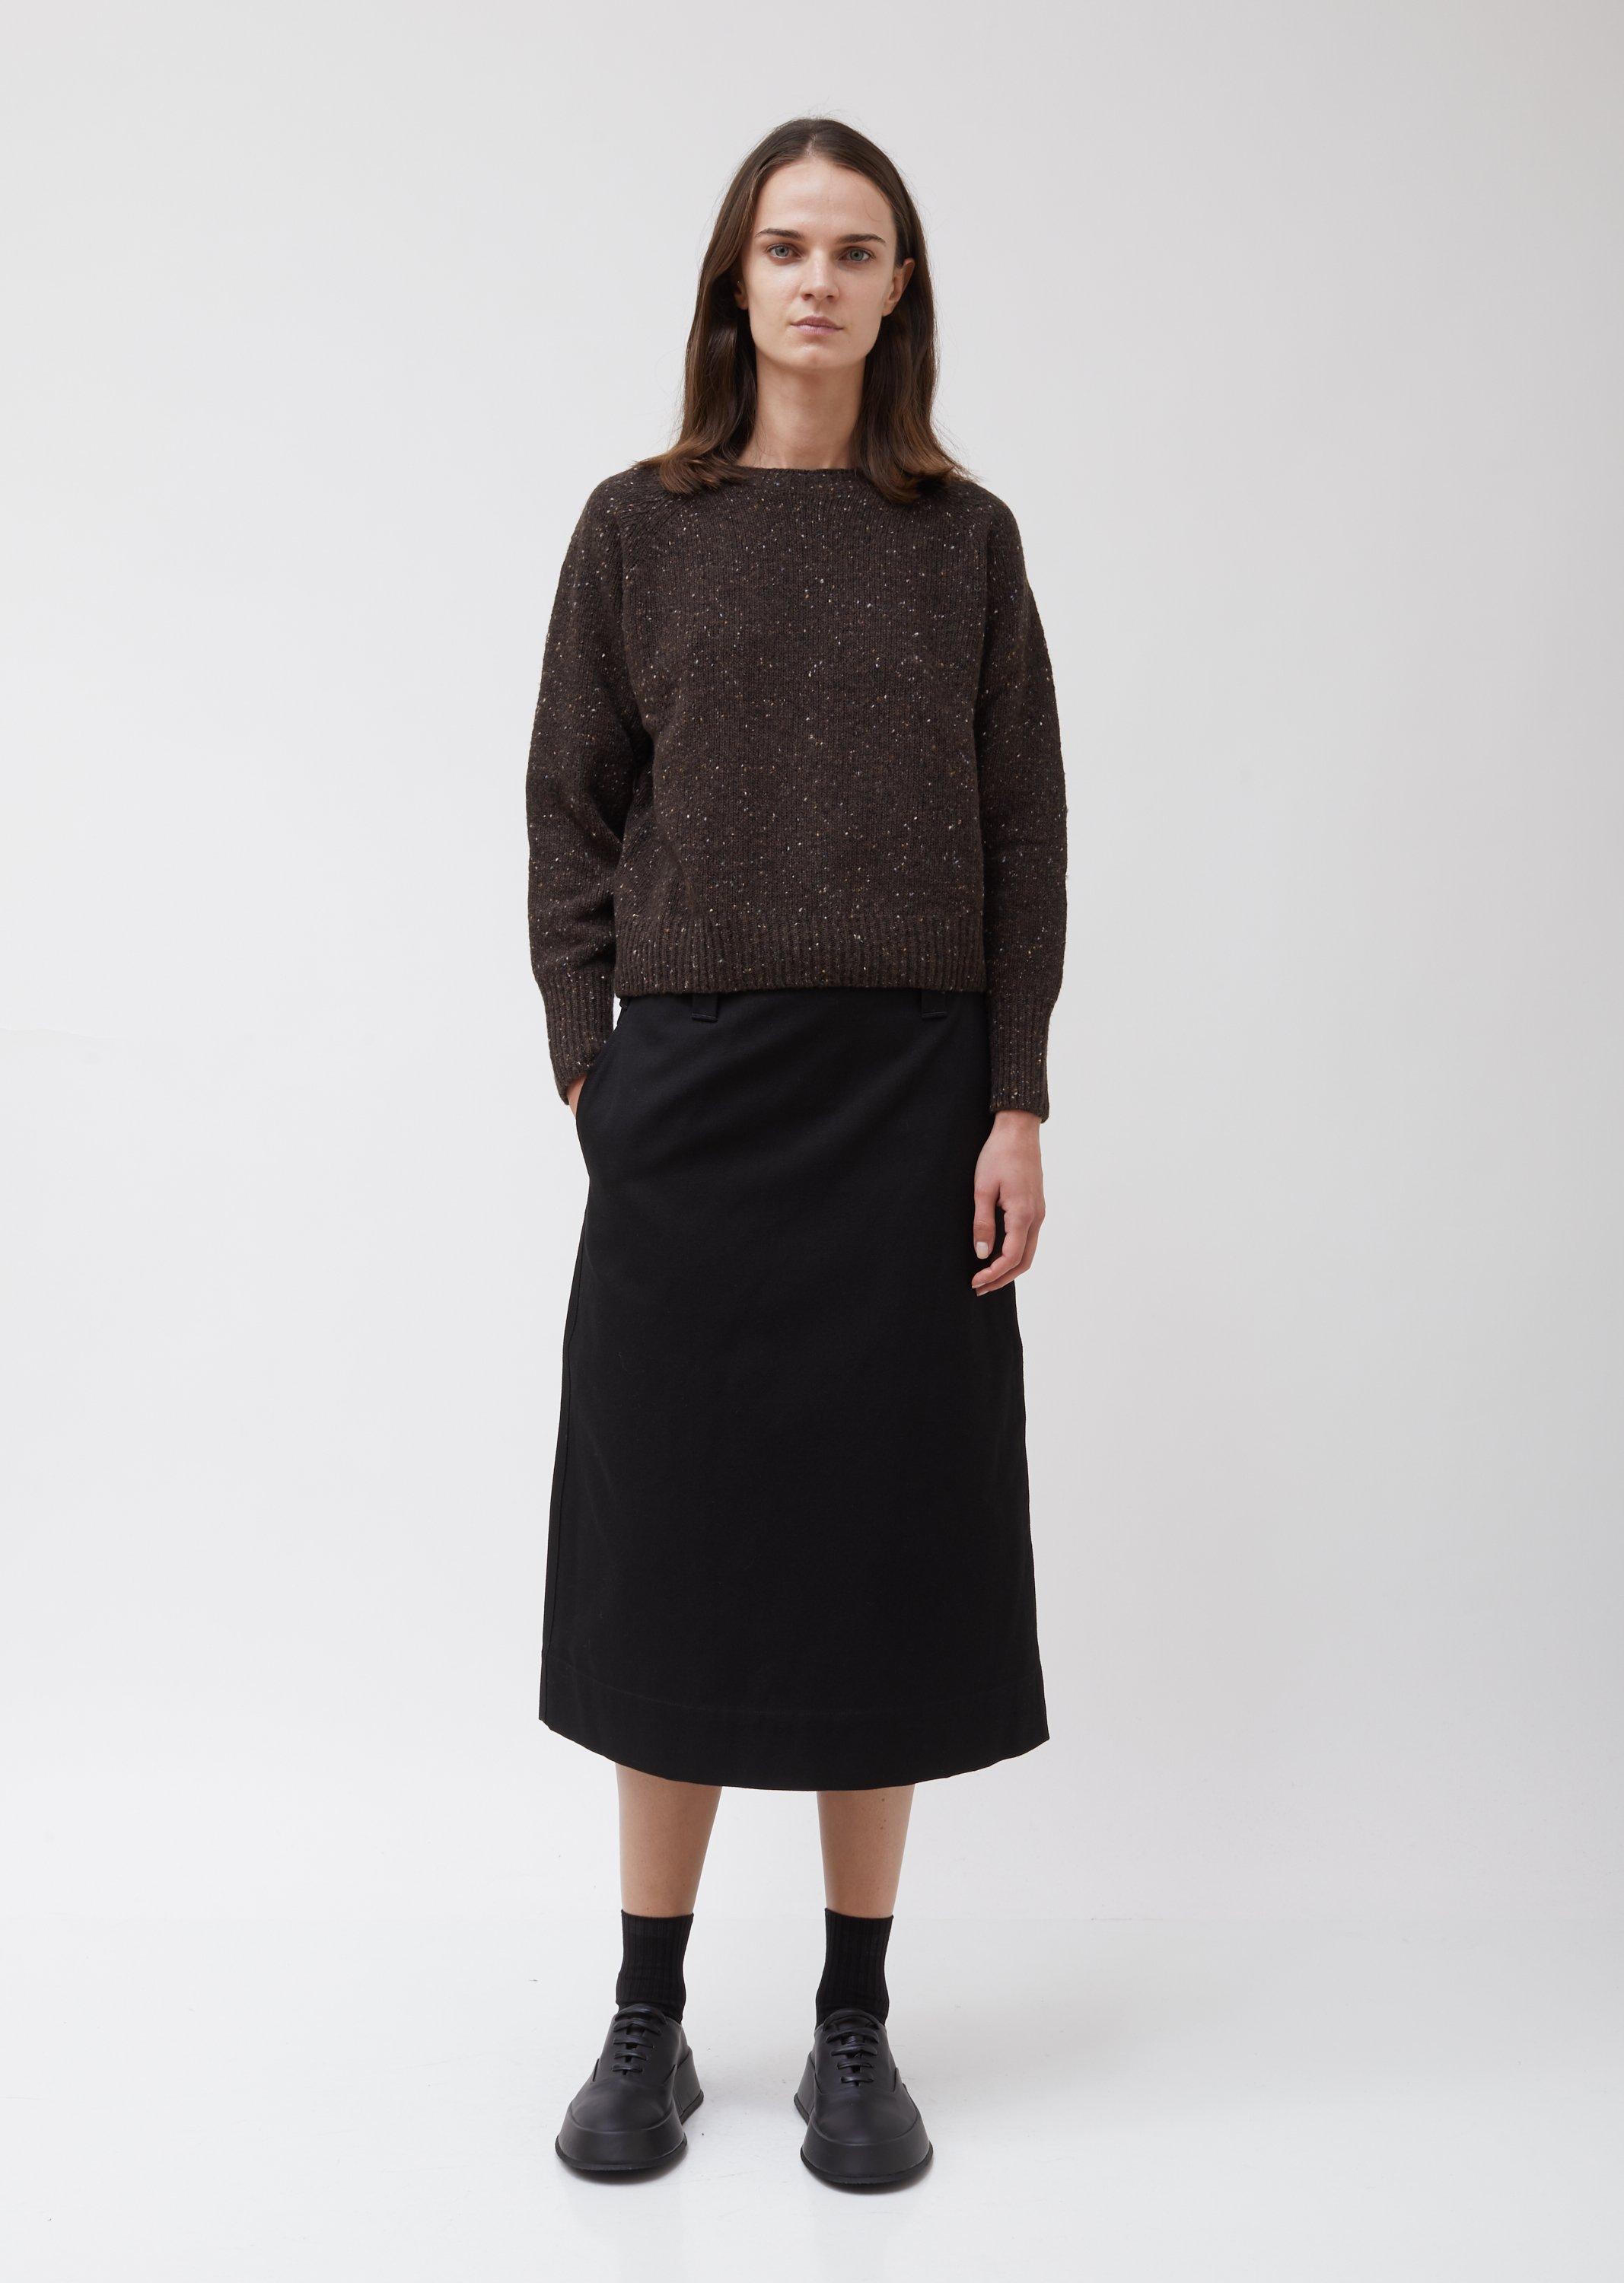 Margaret Howell Donegal Crew Neck Cashmere Sweater in Black - Lyst